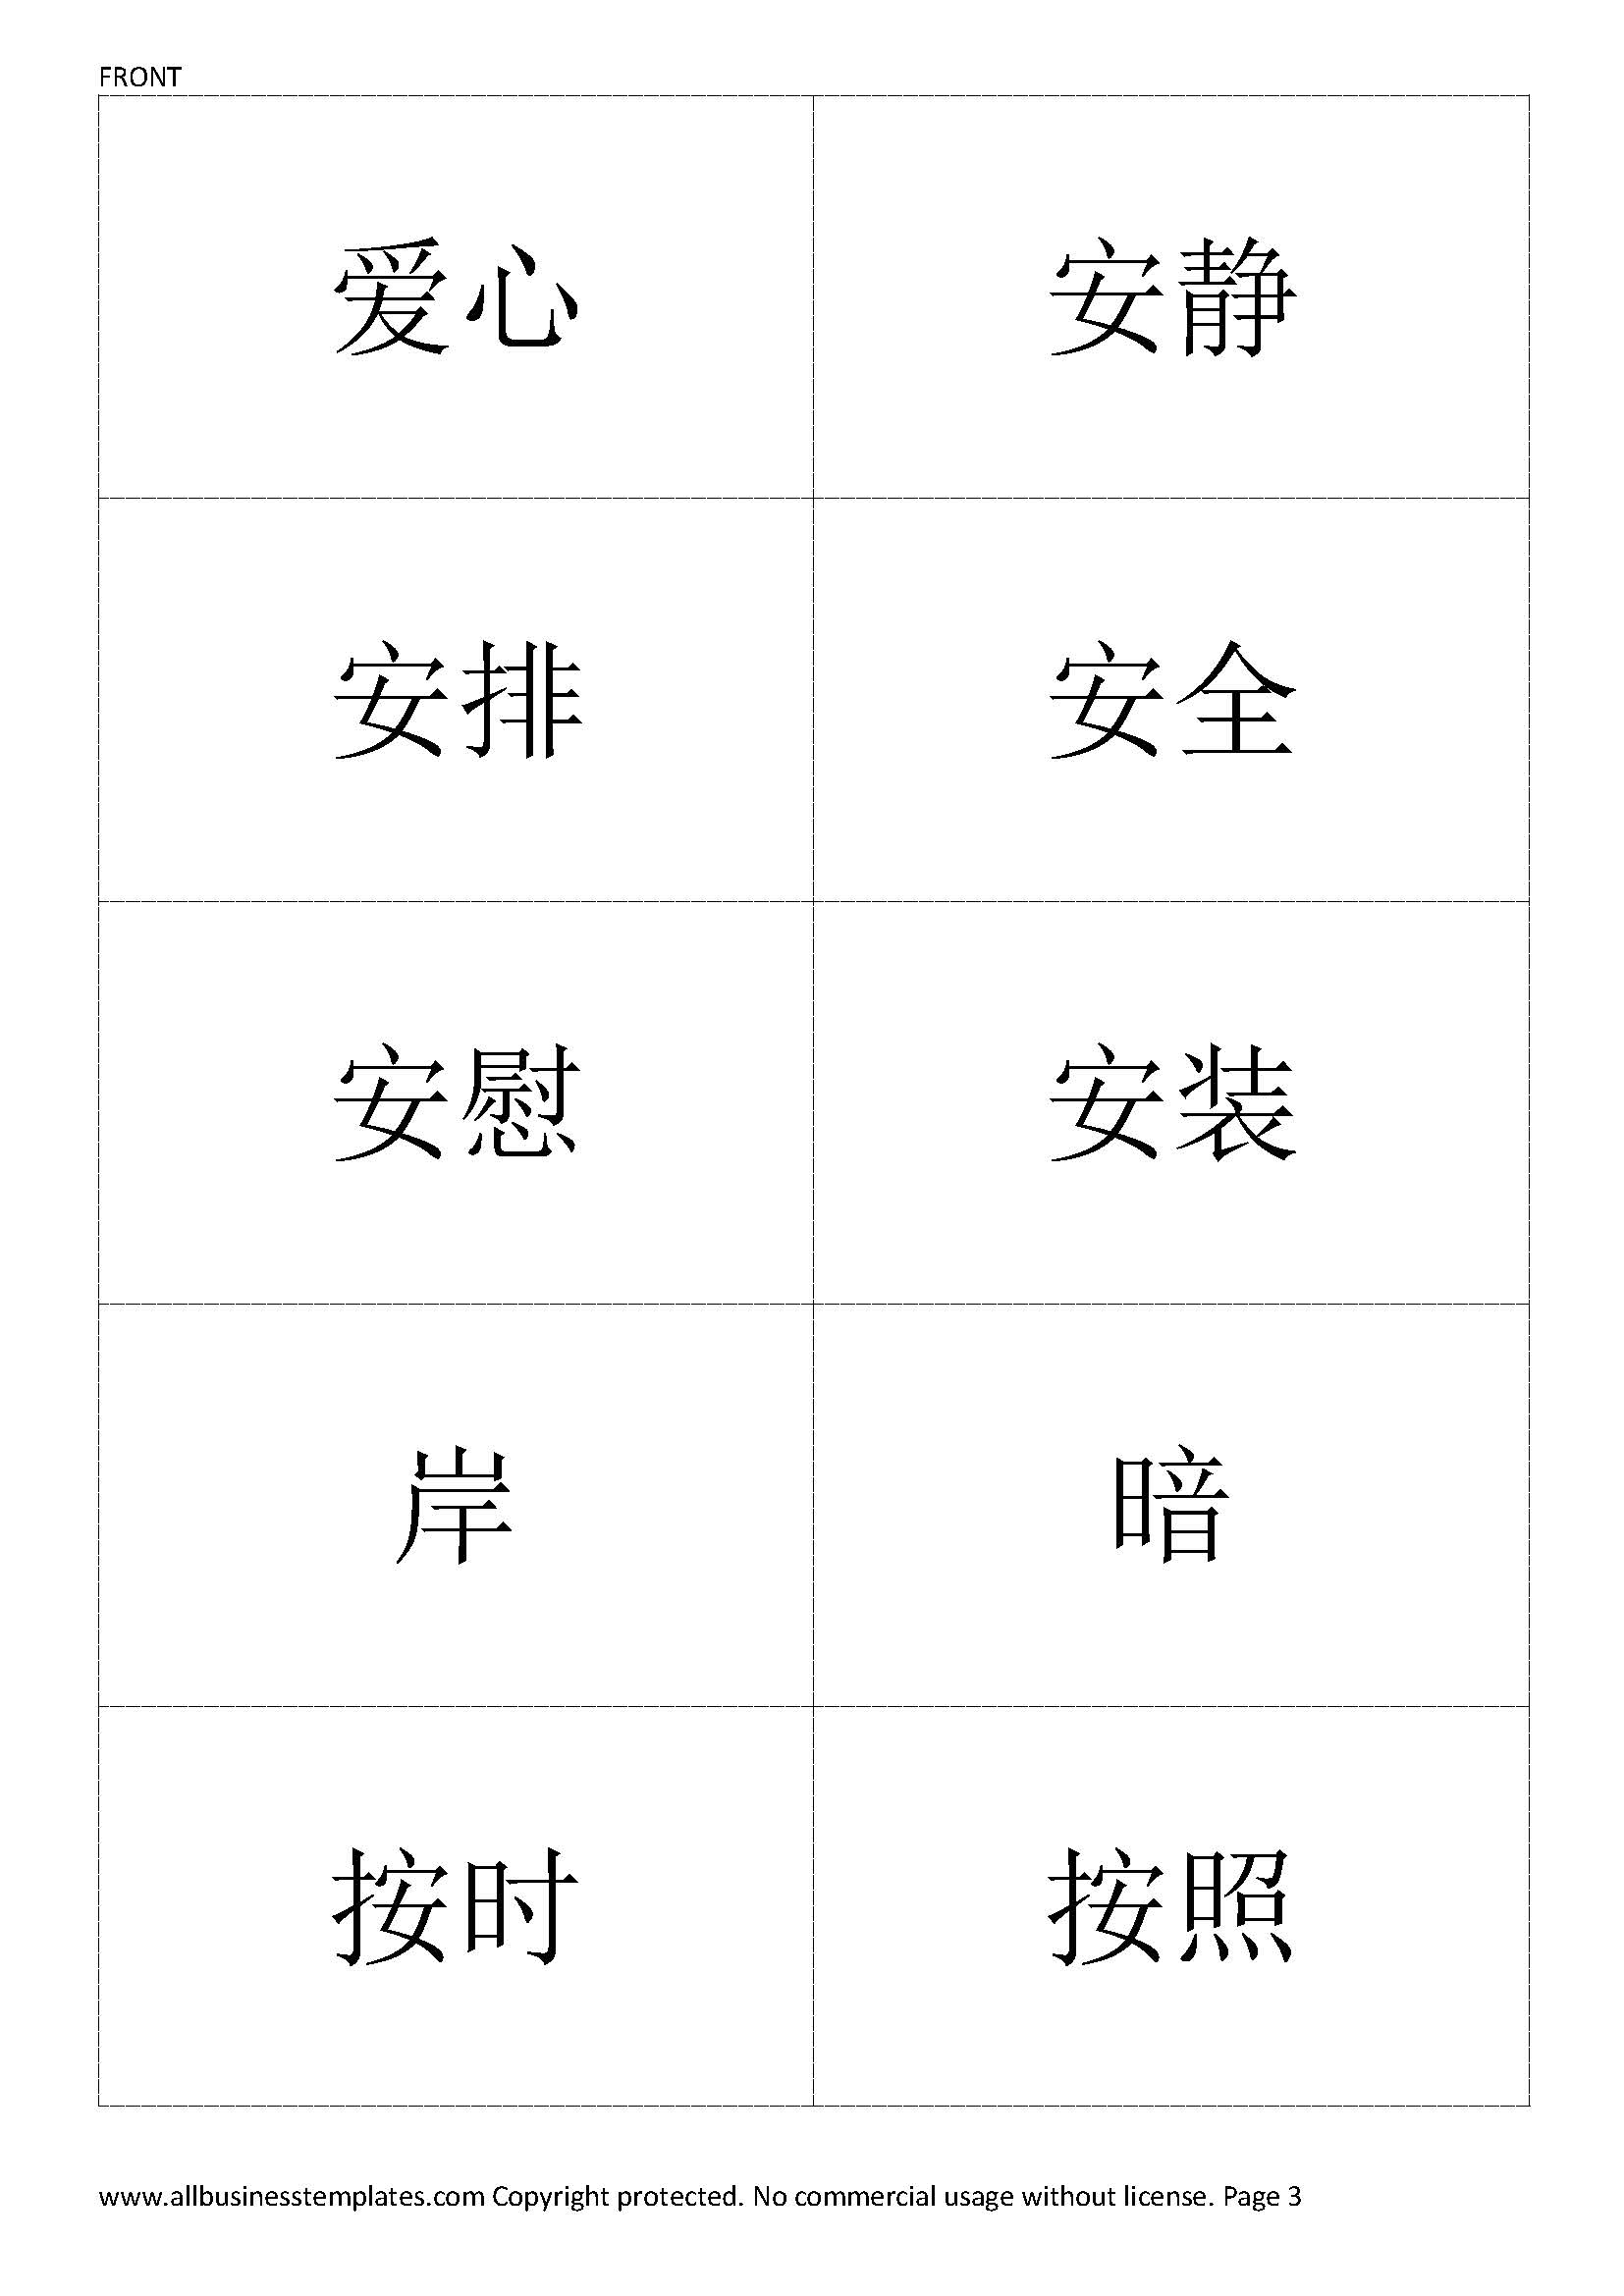 Free Printable Chinese Hsk1 Flash Cards - Chinese Characters - Free Printable Mandarin Flashcards